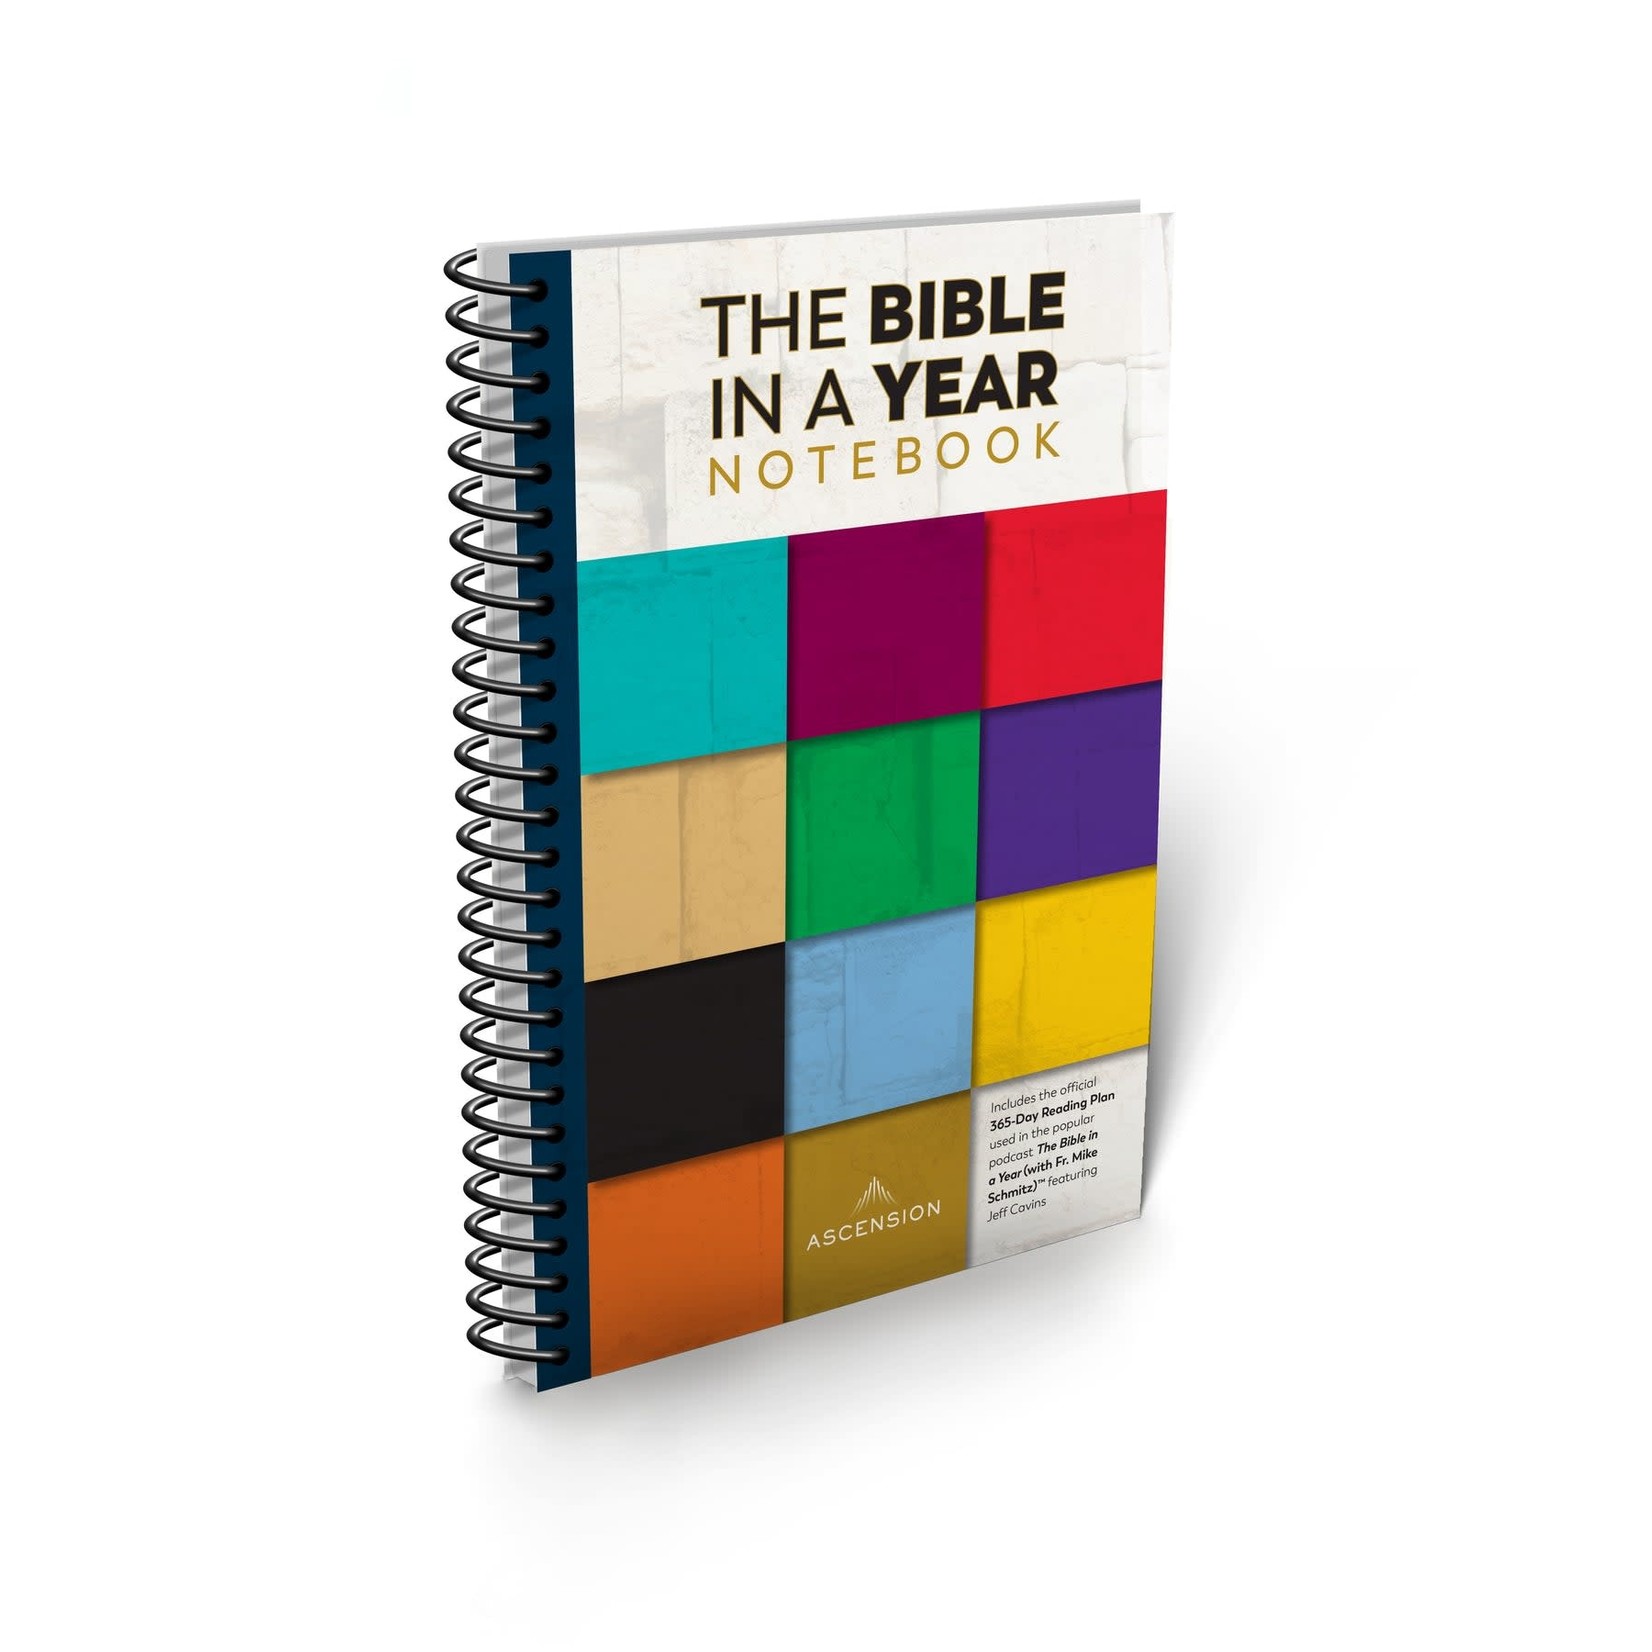 The Bible in a Year Notebook Second Edition St. Paul's Catholic Books